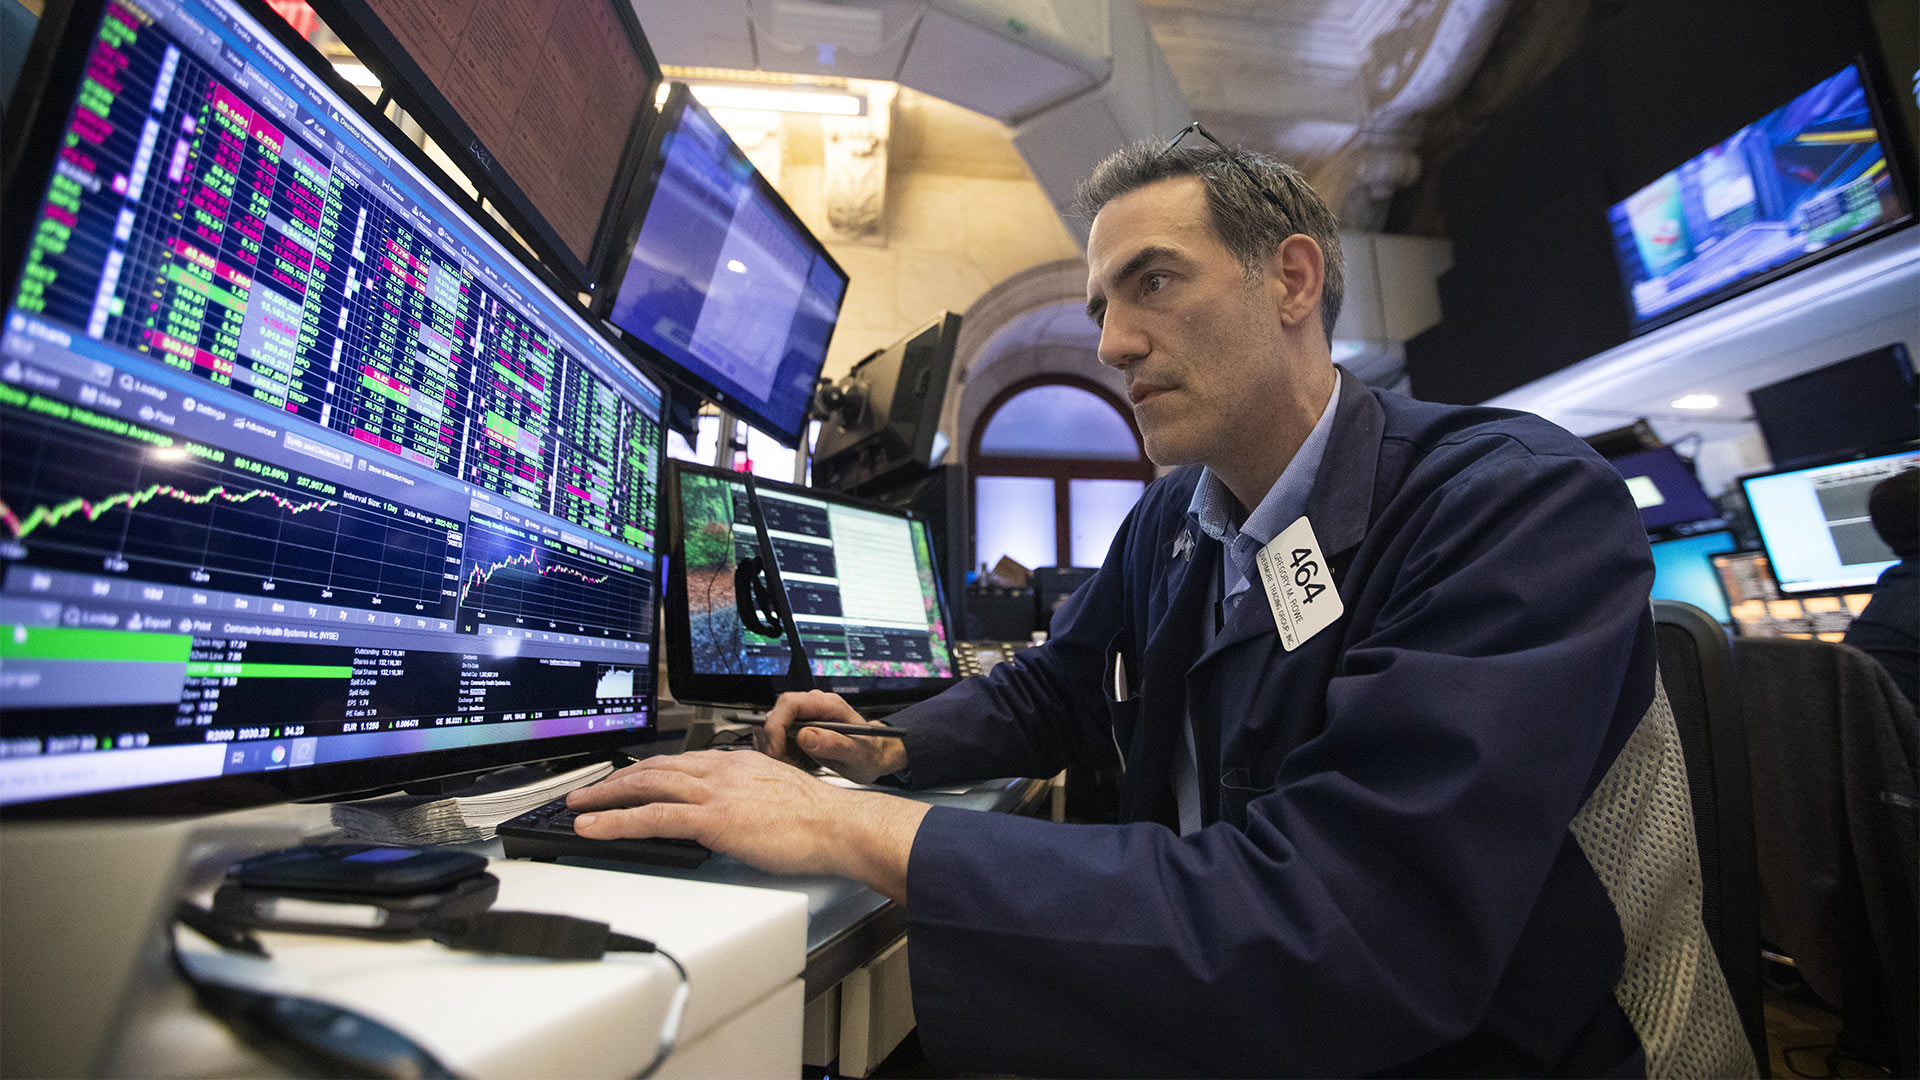 Broker an der NYSE | picture alliance/dpa/XinHua